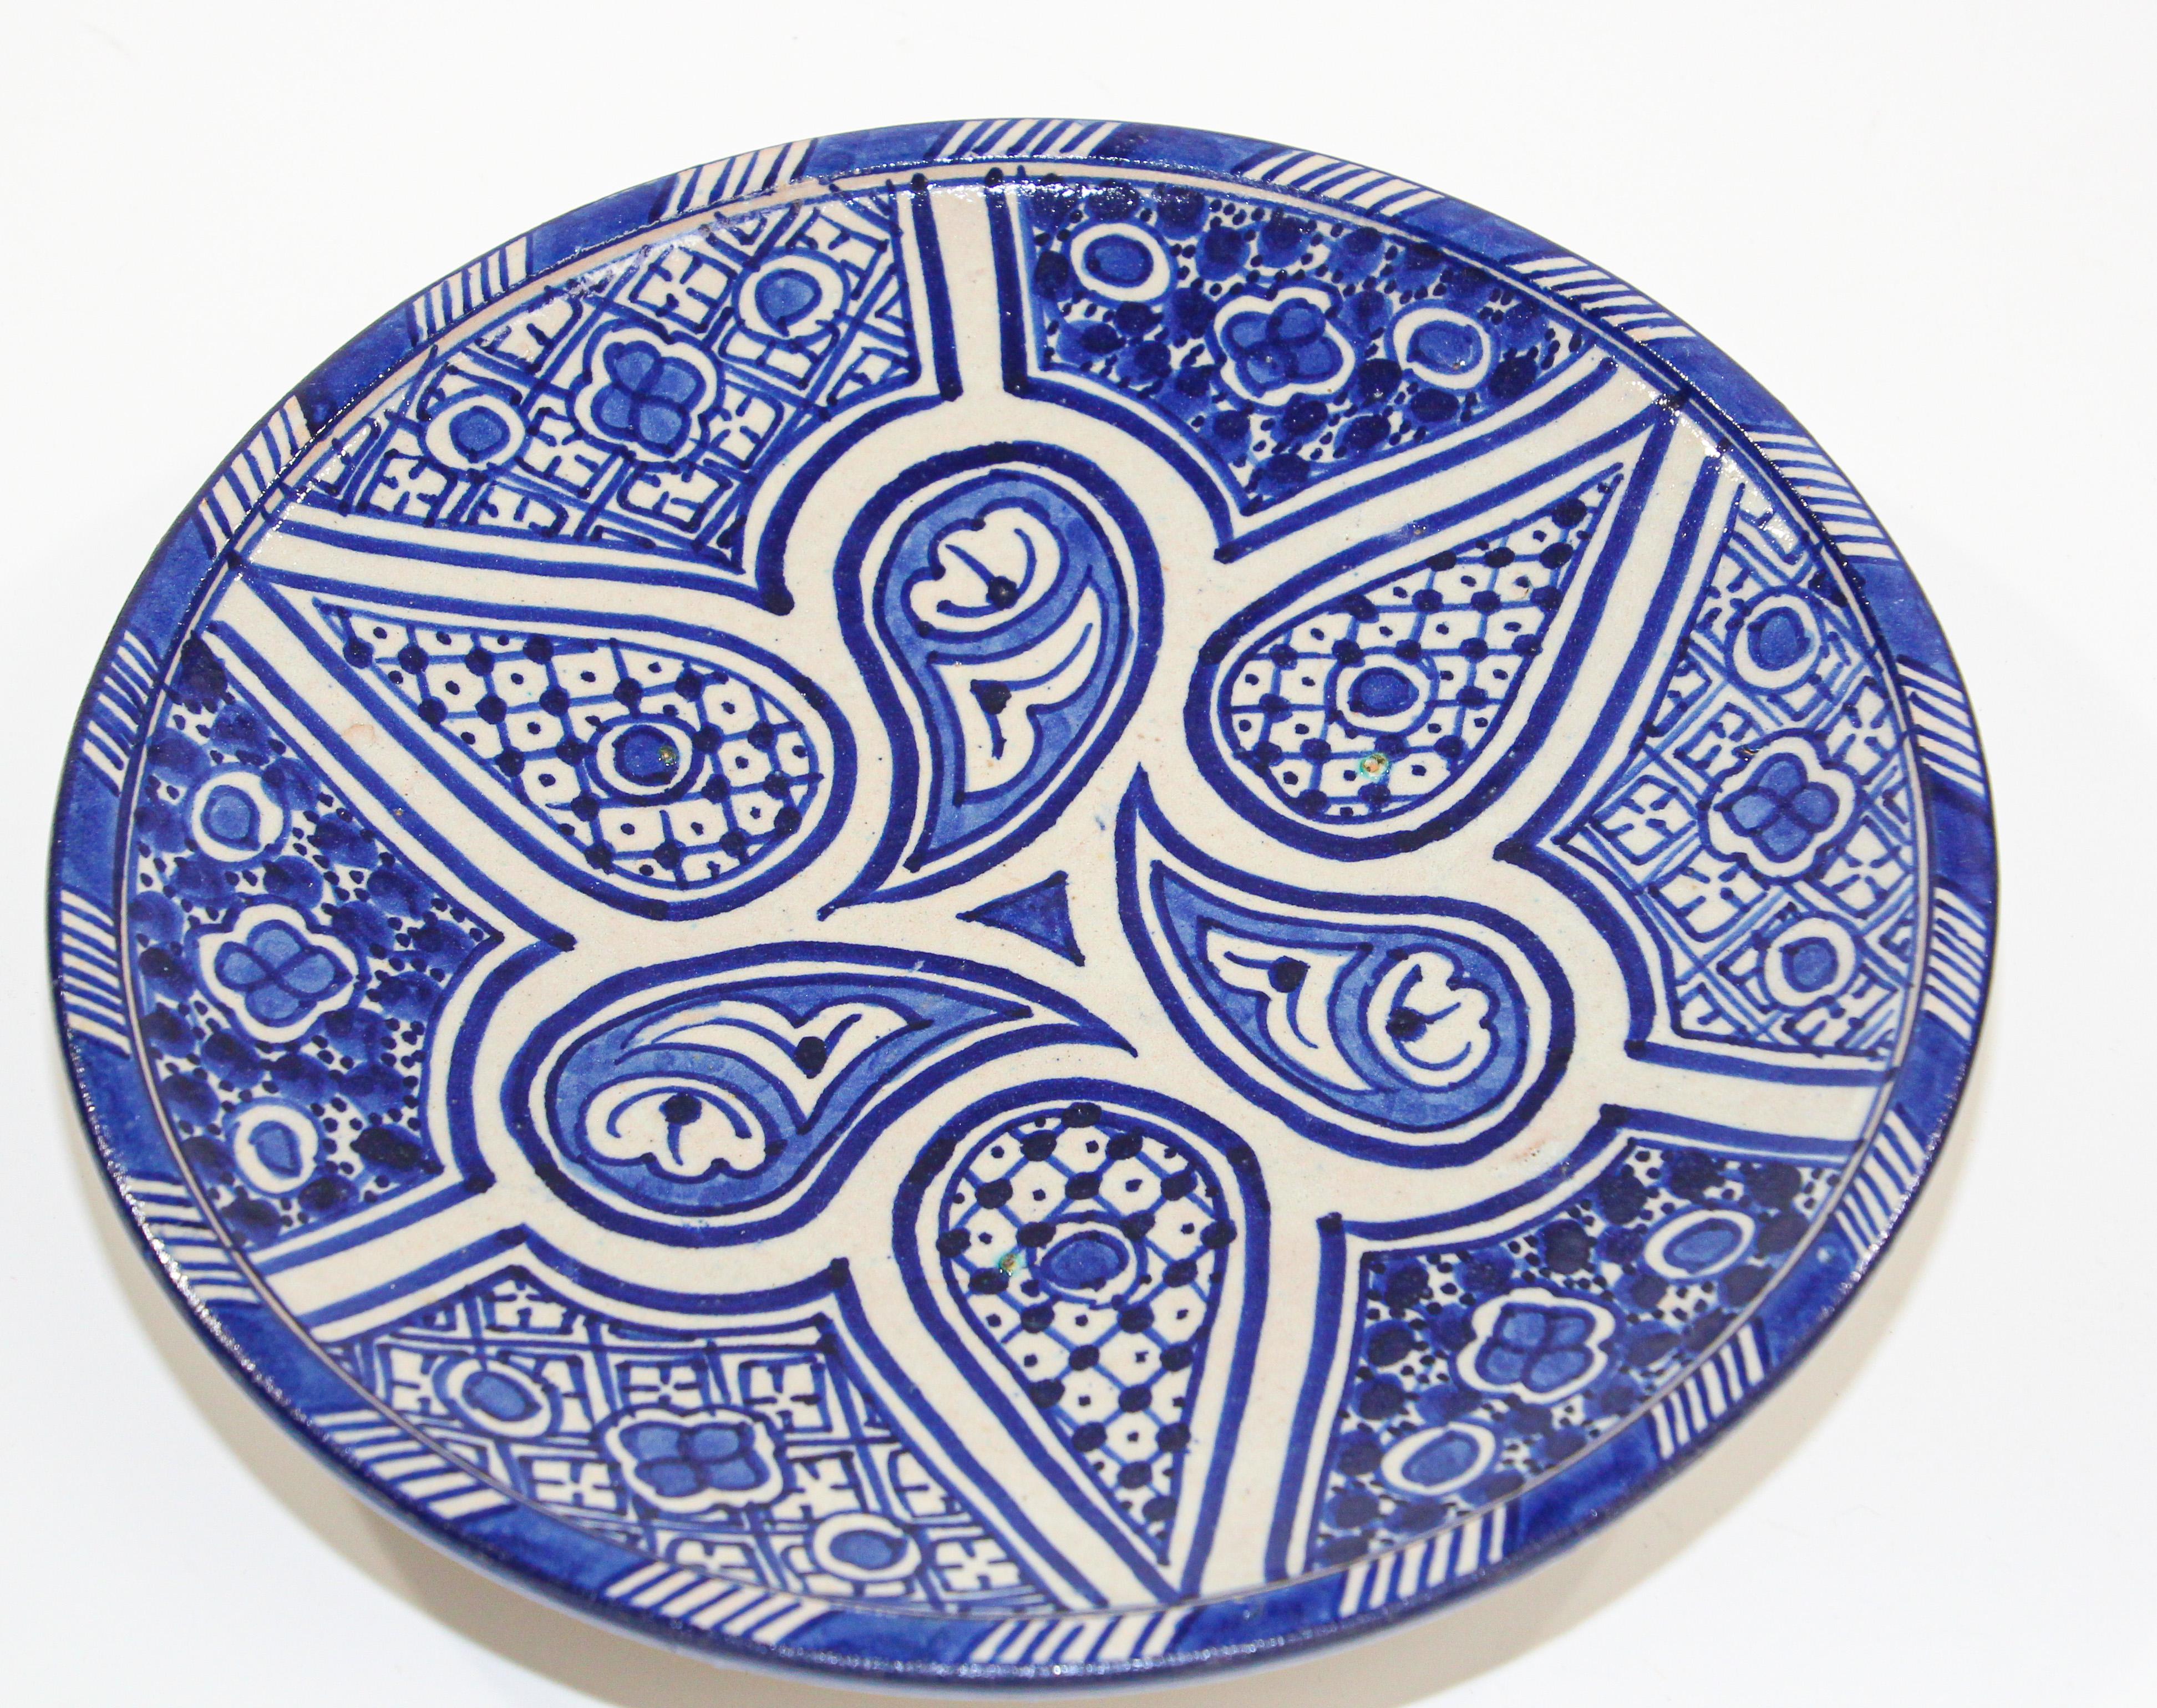 Moroccan handcrafted ceramic plate hand painted in blue and white geometric Moorish designs from Fez Morocco.
Could be use as a wall hanging ceramic decorative plate or used to display fruits.
Size: 10